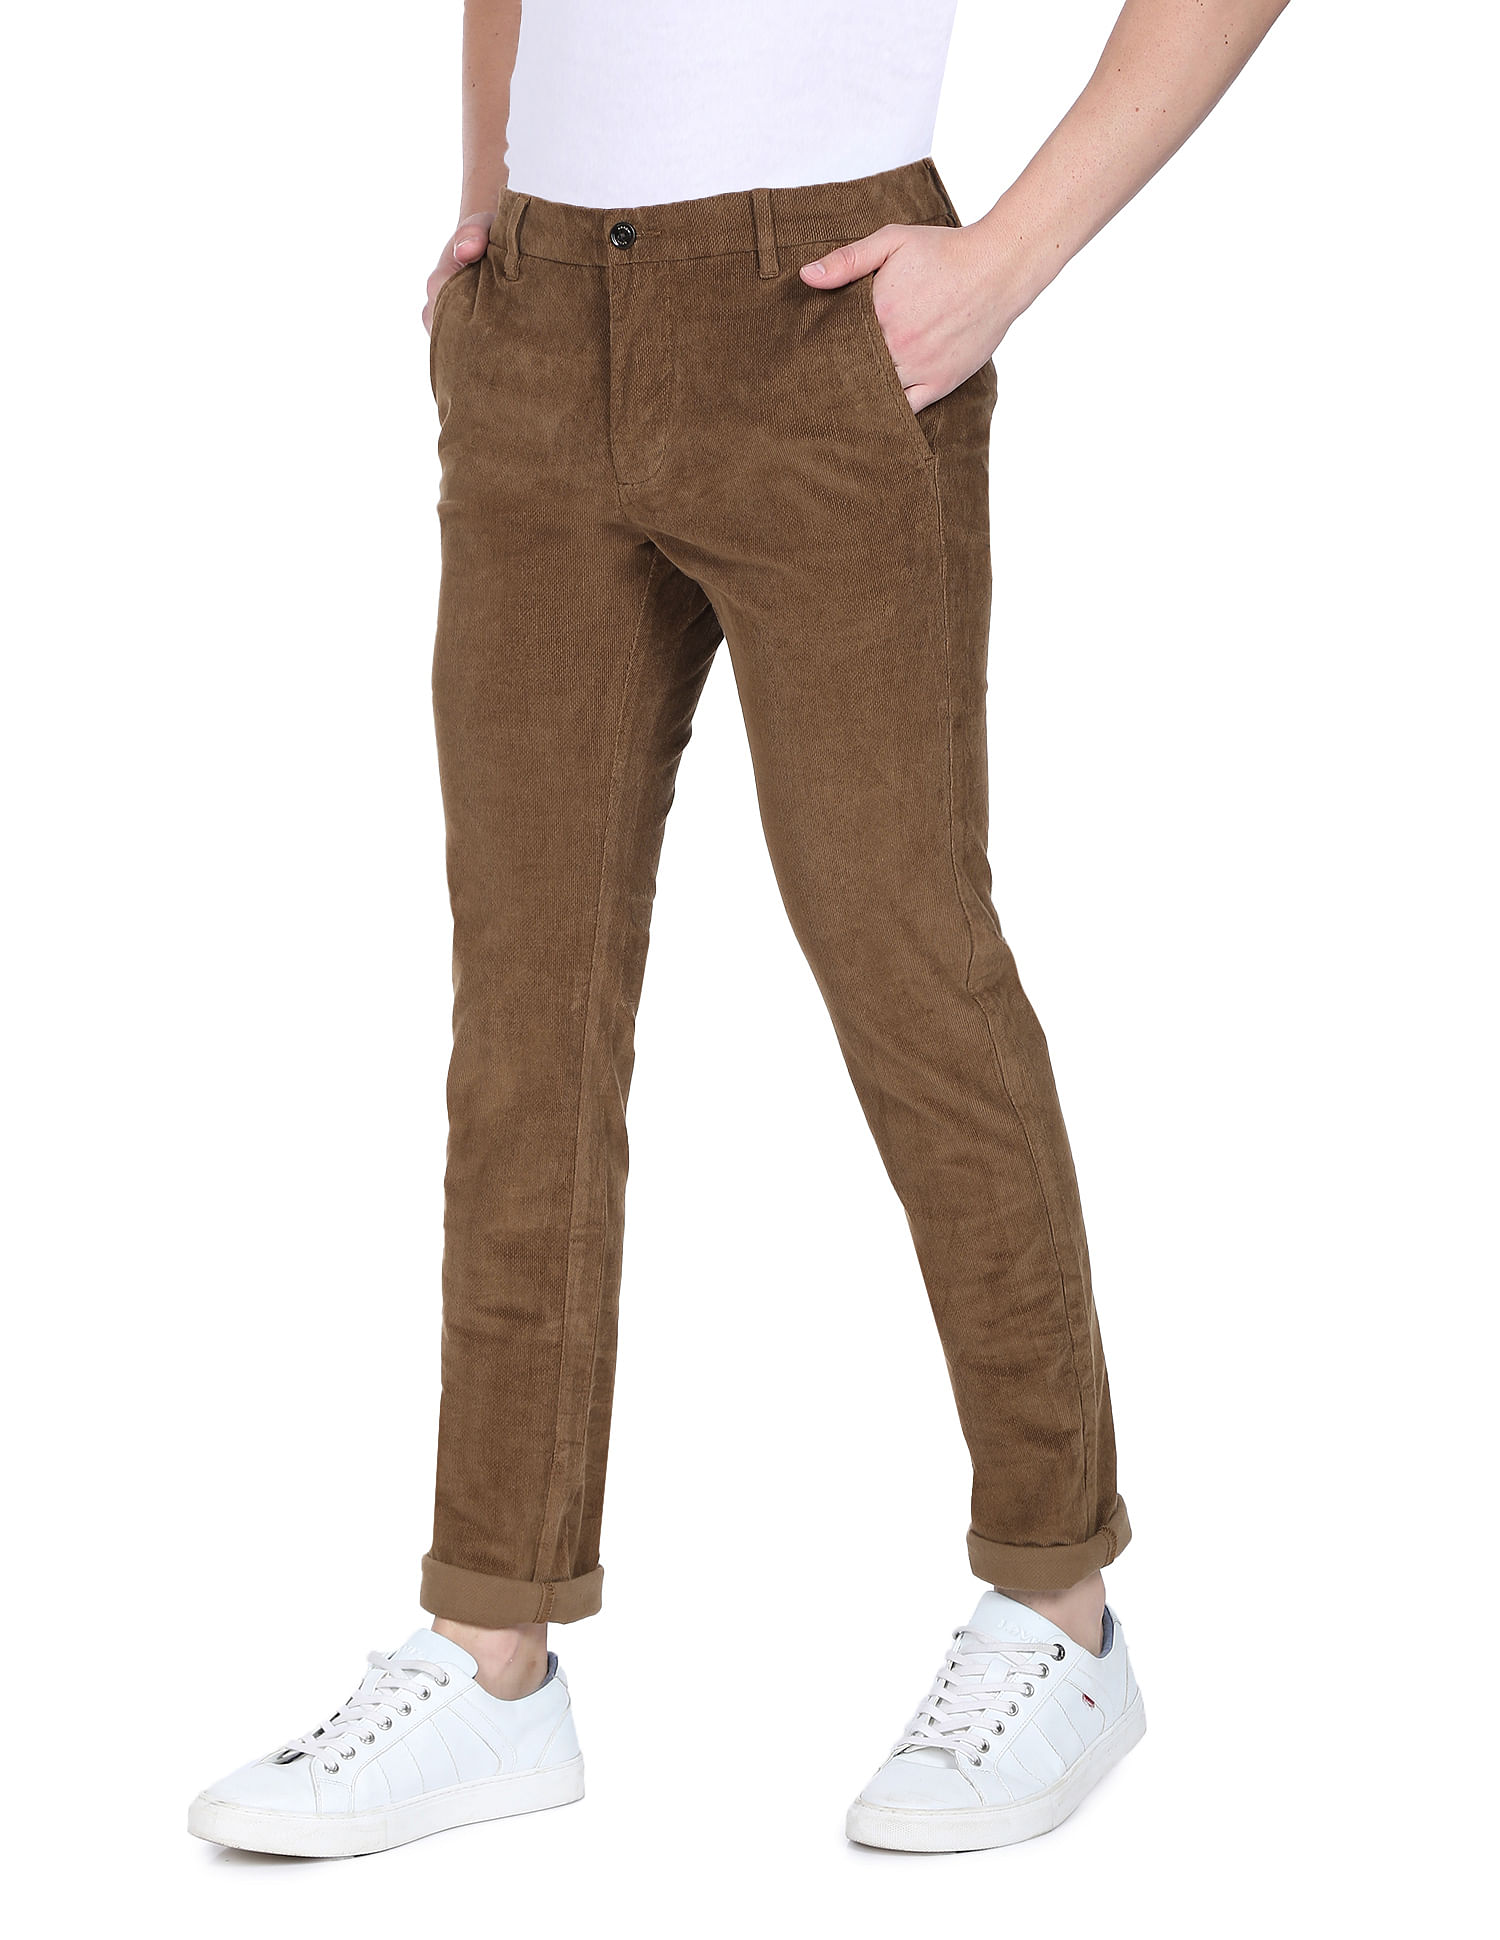 Buy Men Beige Slim Fit Solid Casual Trousers Online - 792324 | Allen Solly-saigonsouth.com.vn